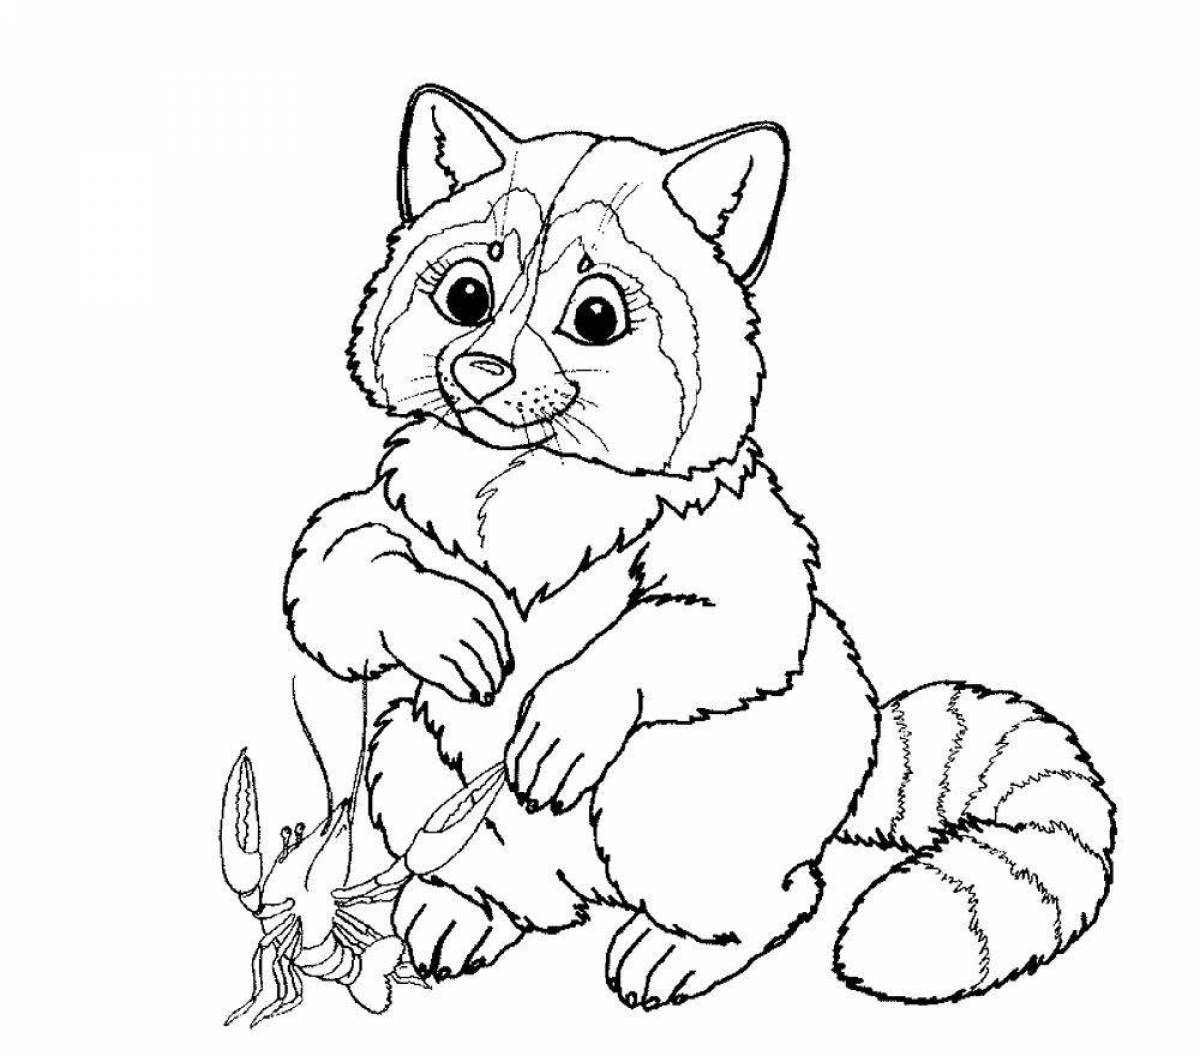 Fancy animal coloring pages